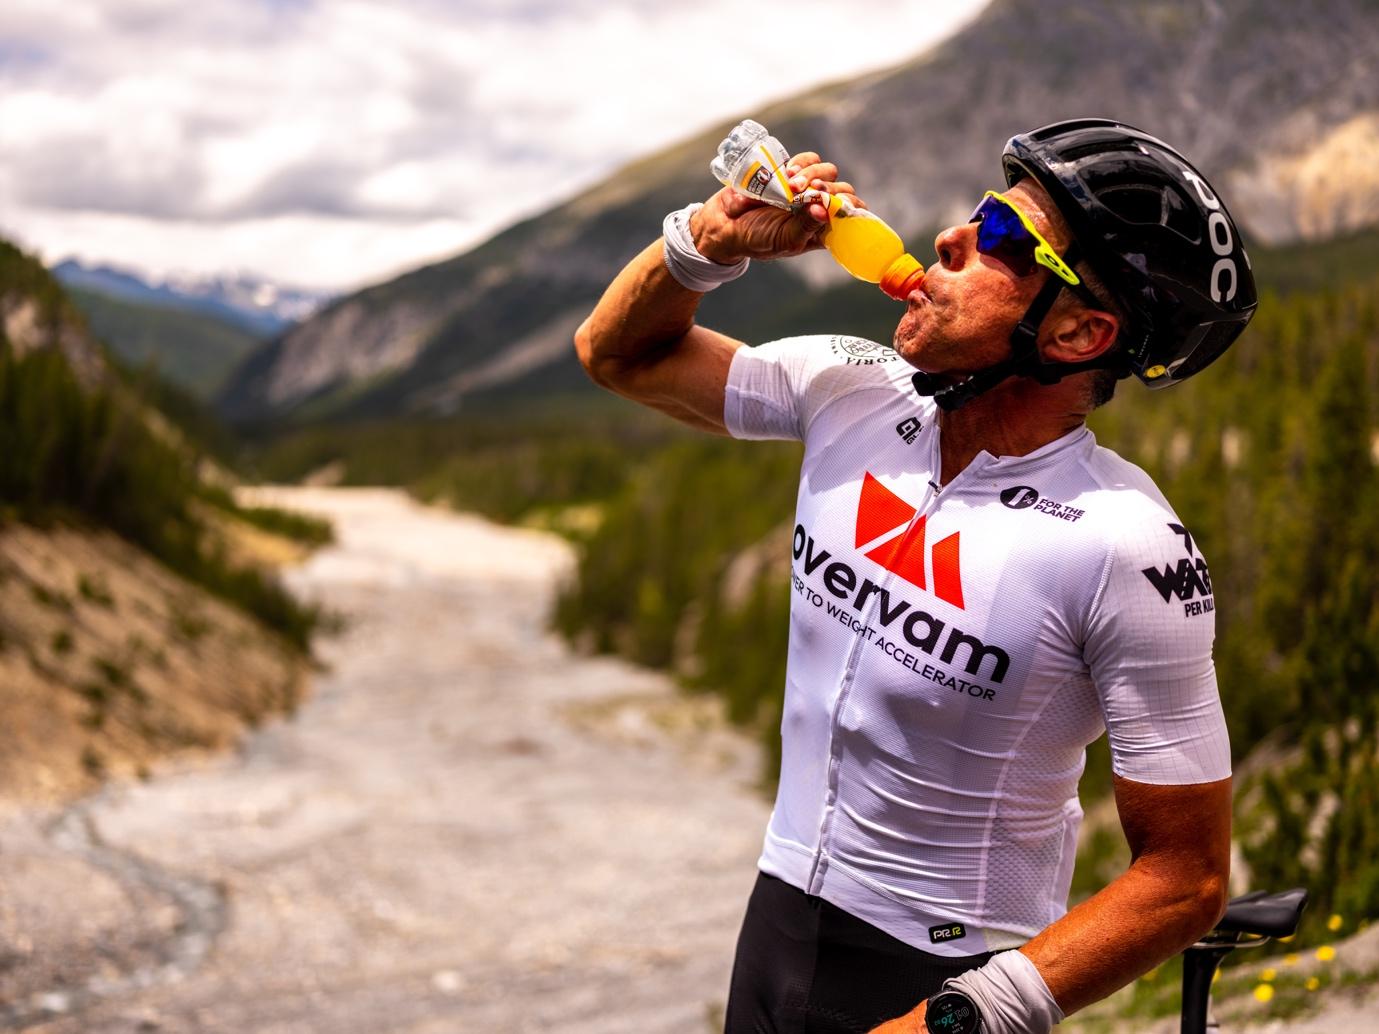 Nutrition periodization for cyclists